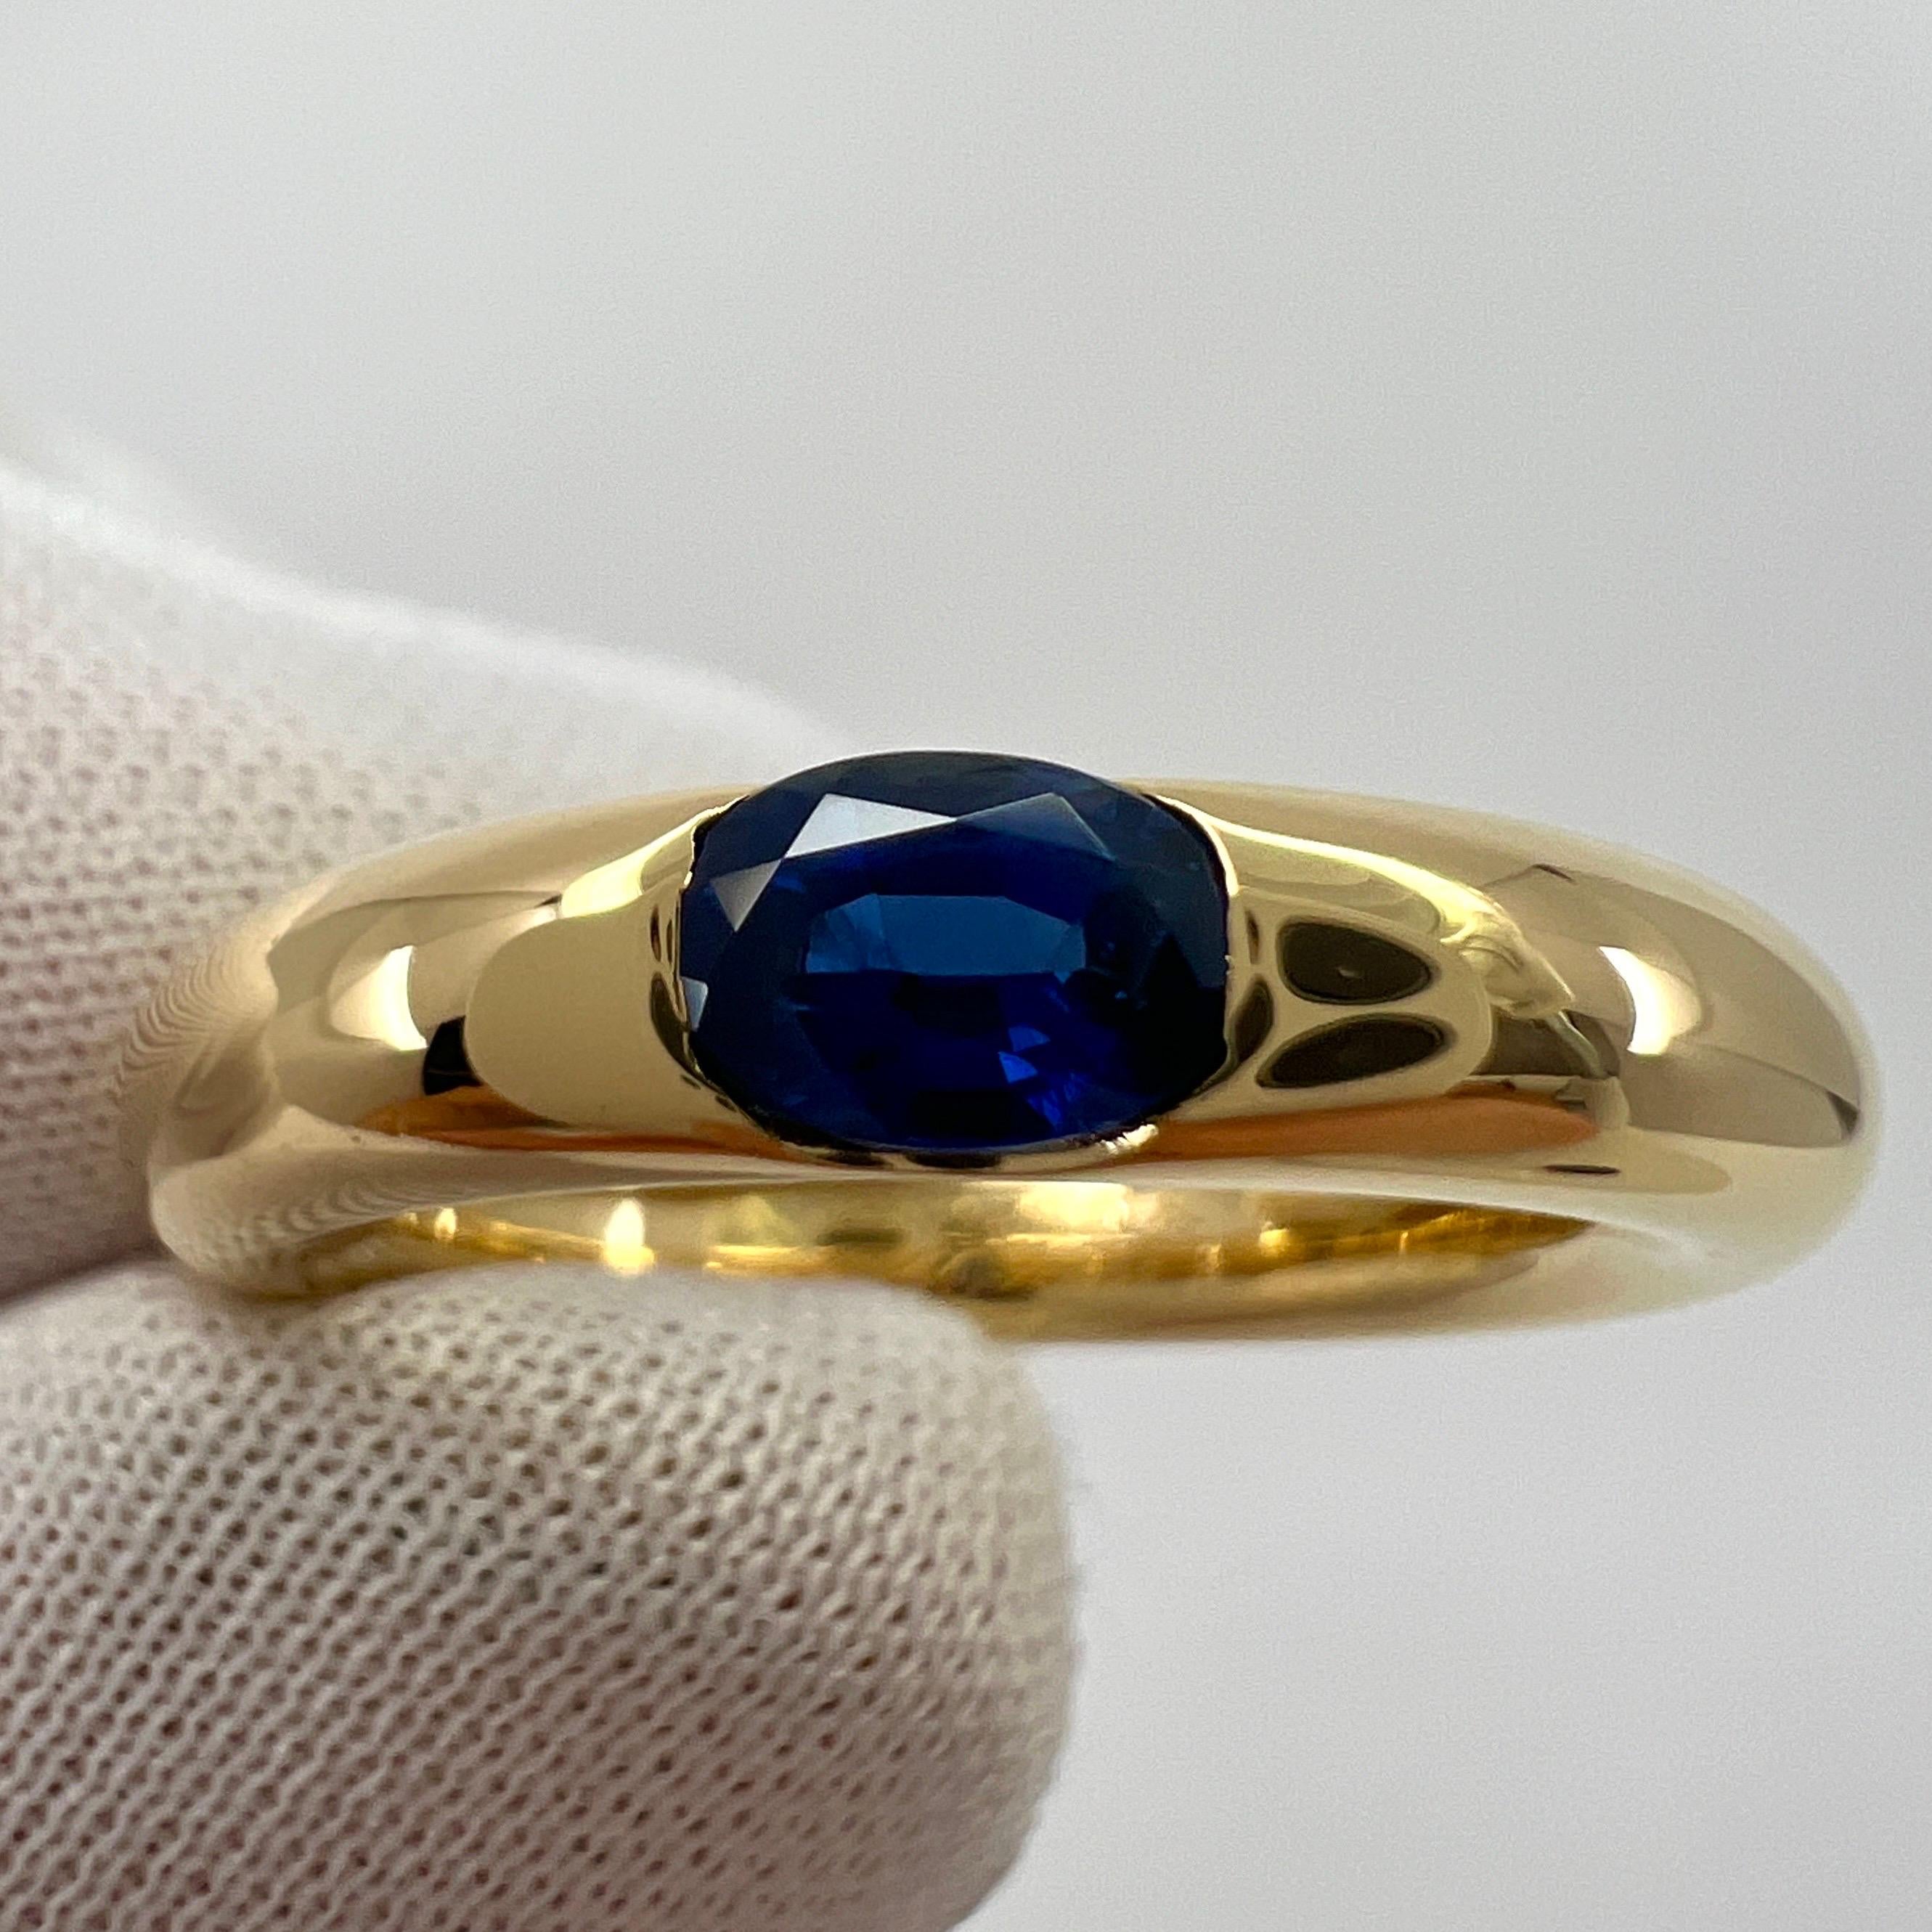 Vintage Cartier Blue Sapphire Oval Ellipse 18k Yellow Gold Solitaire Ring 51 7